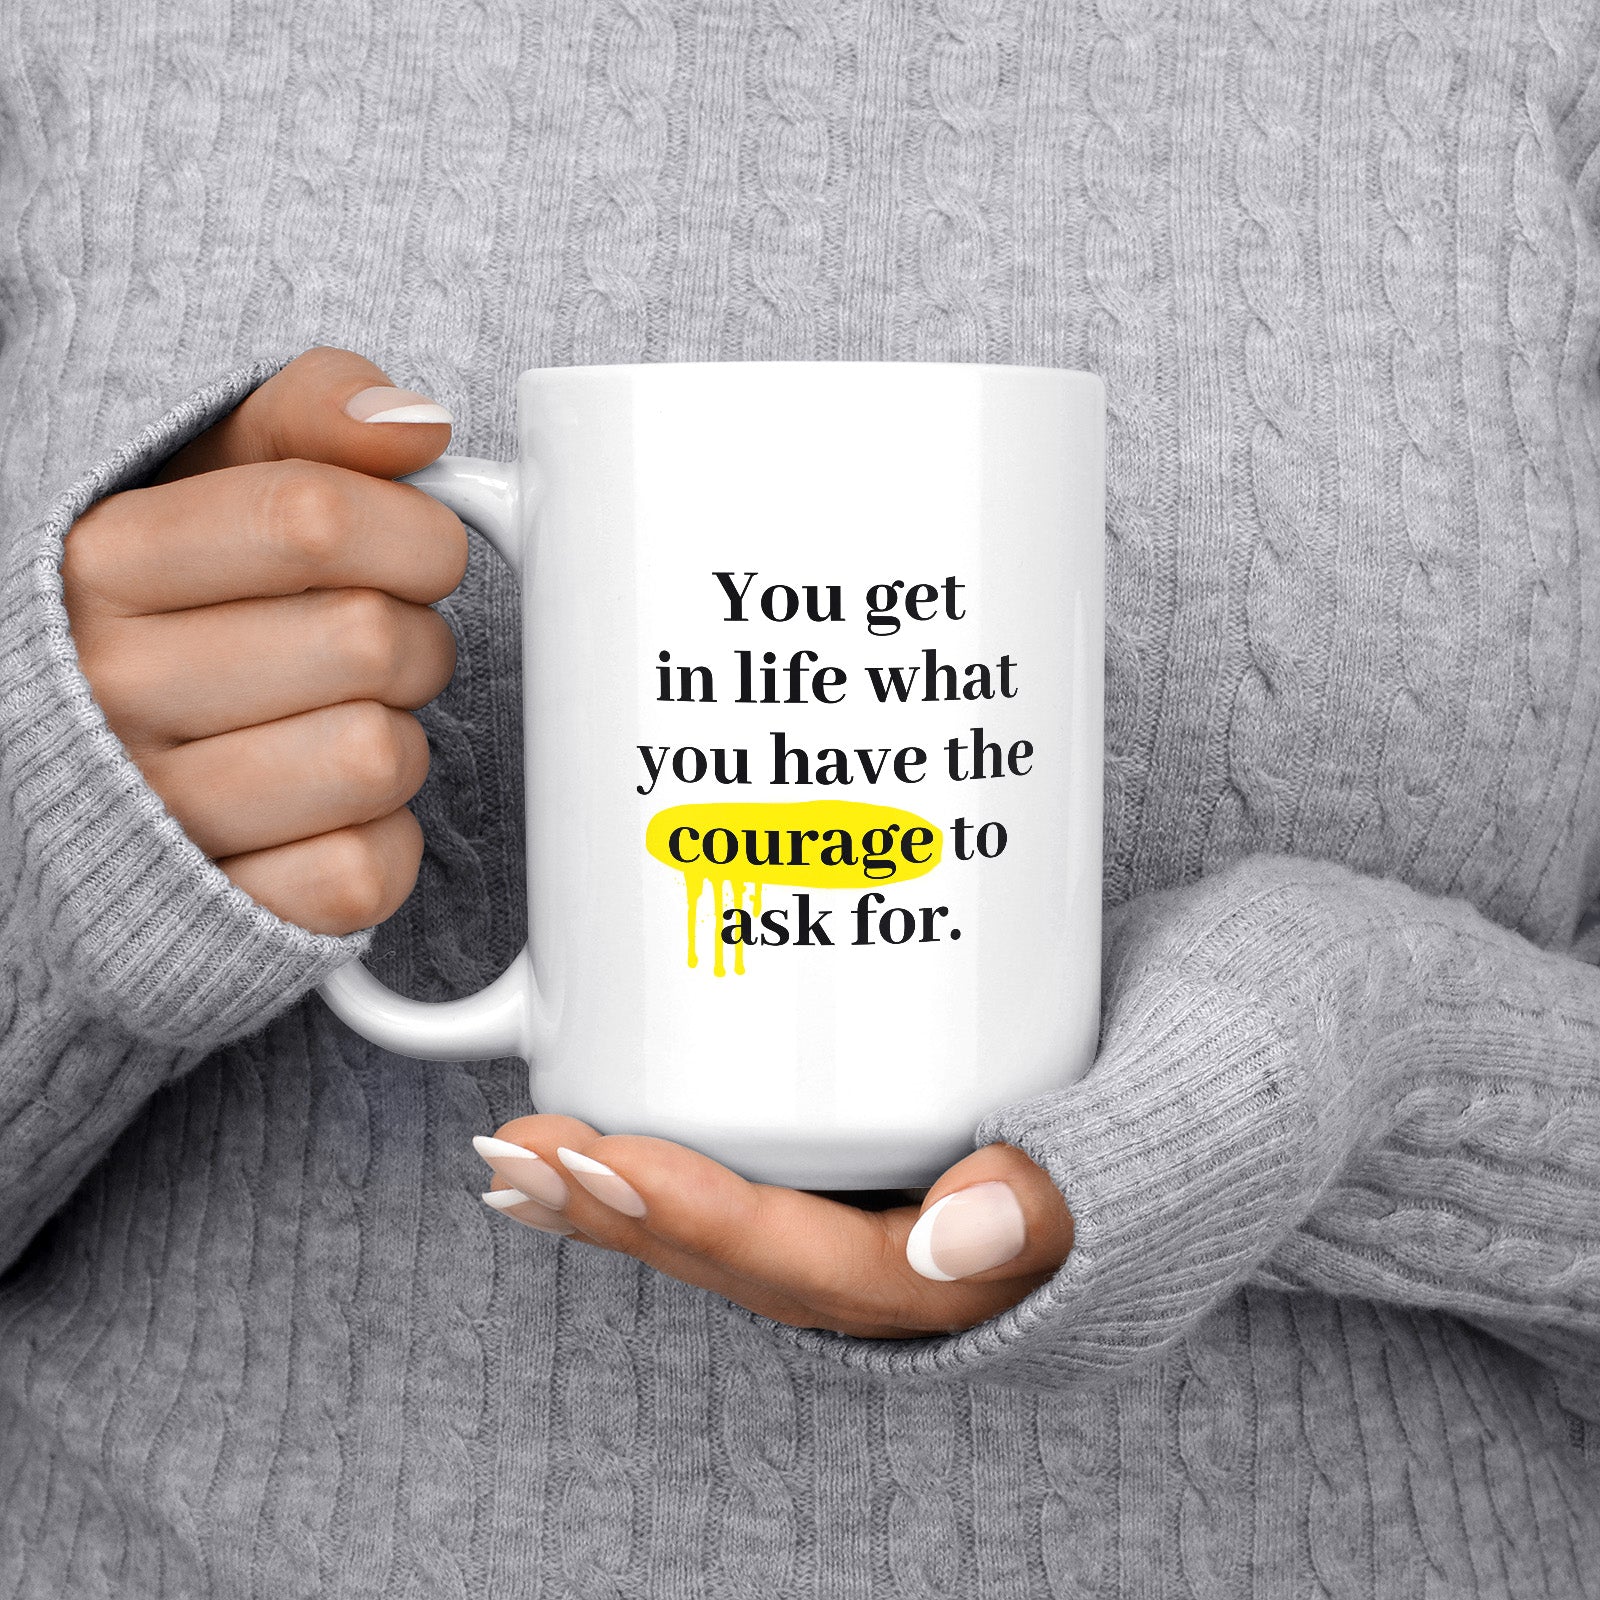 Be inspired by Oprah Winfrey's famous quote, "You get in life what you have the courage to ask for" on this white and glossy 15oz coffee mug with the handle on the left.